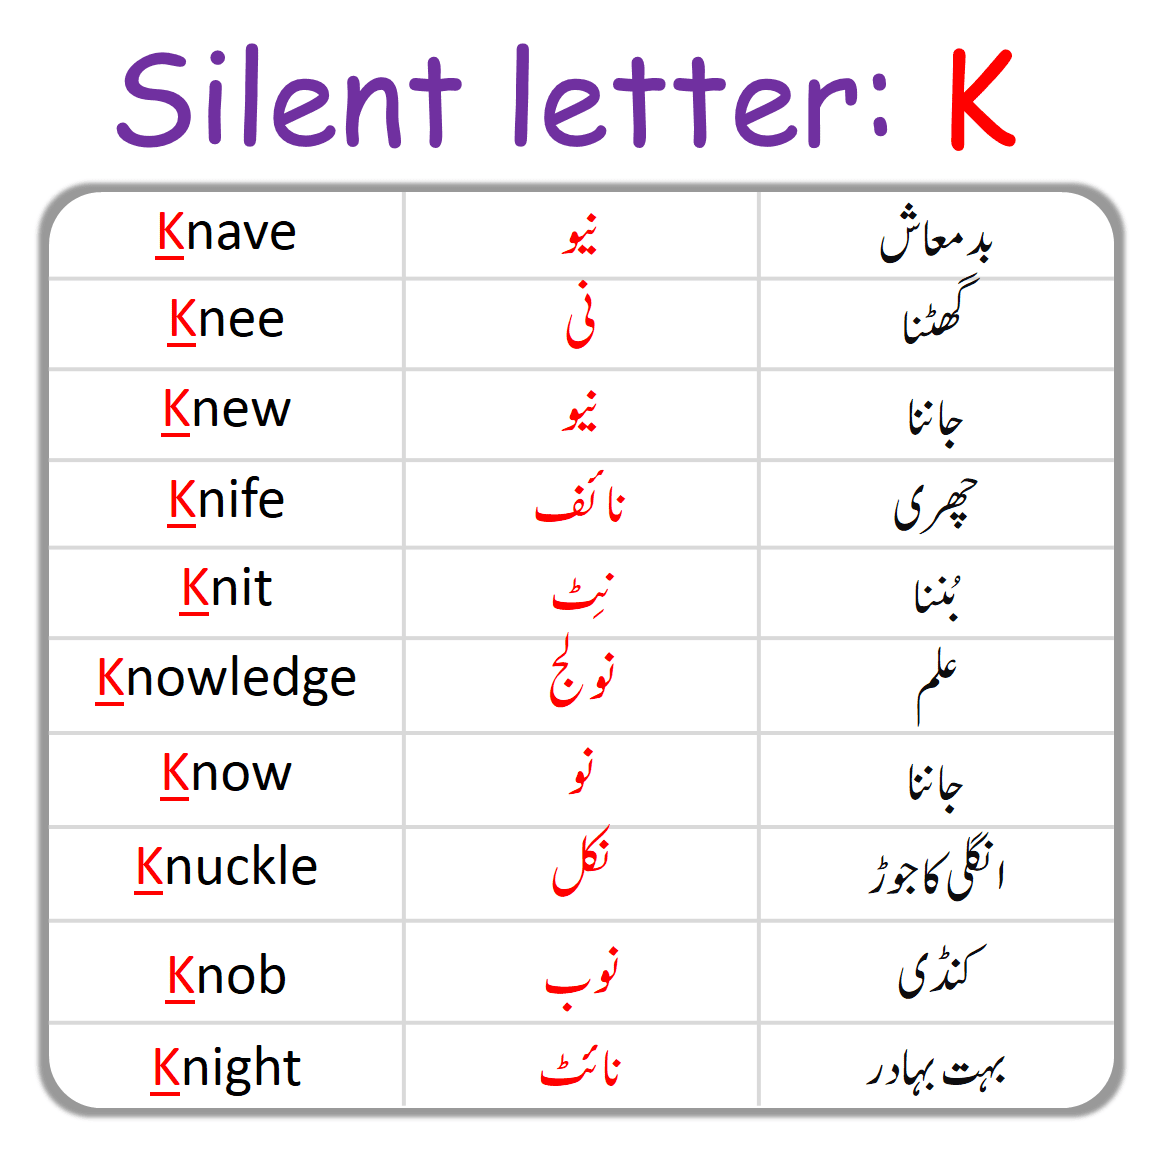 K Silent Letter in English with Urdu Examples